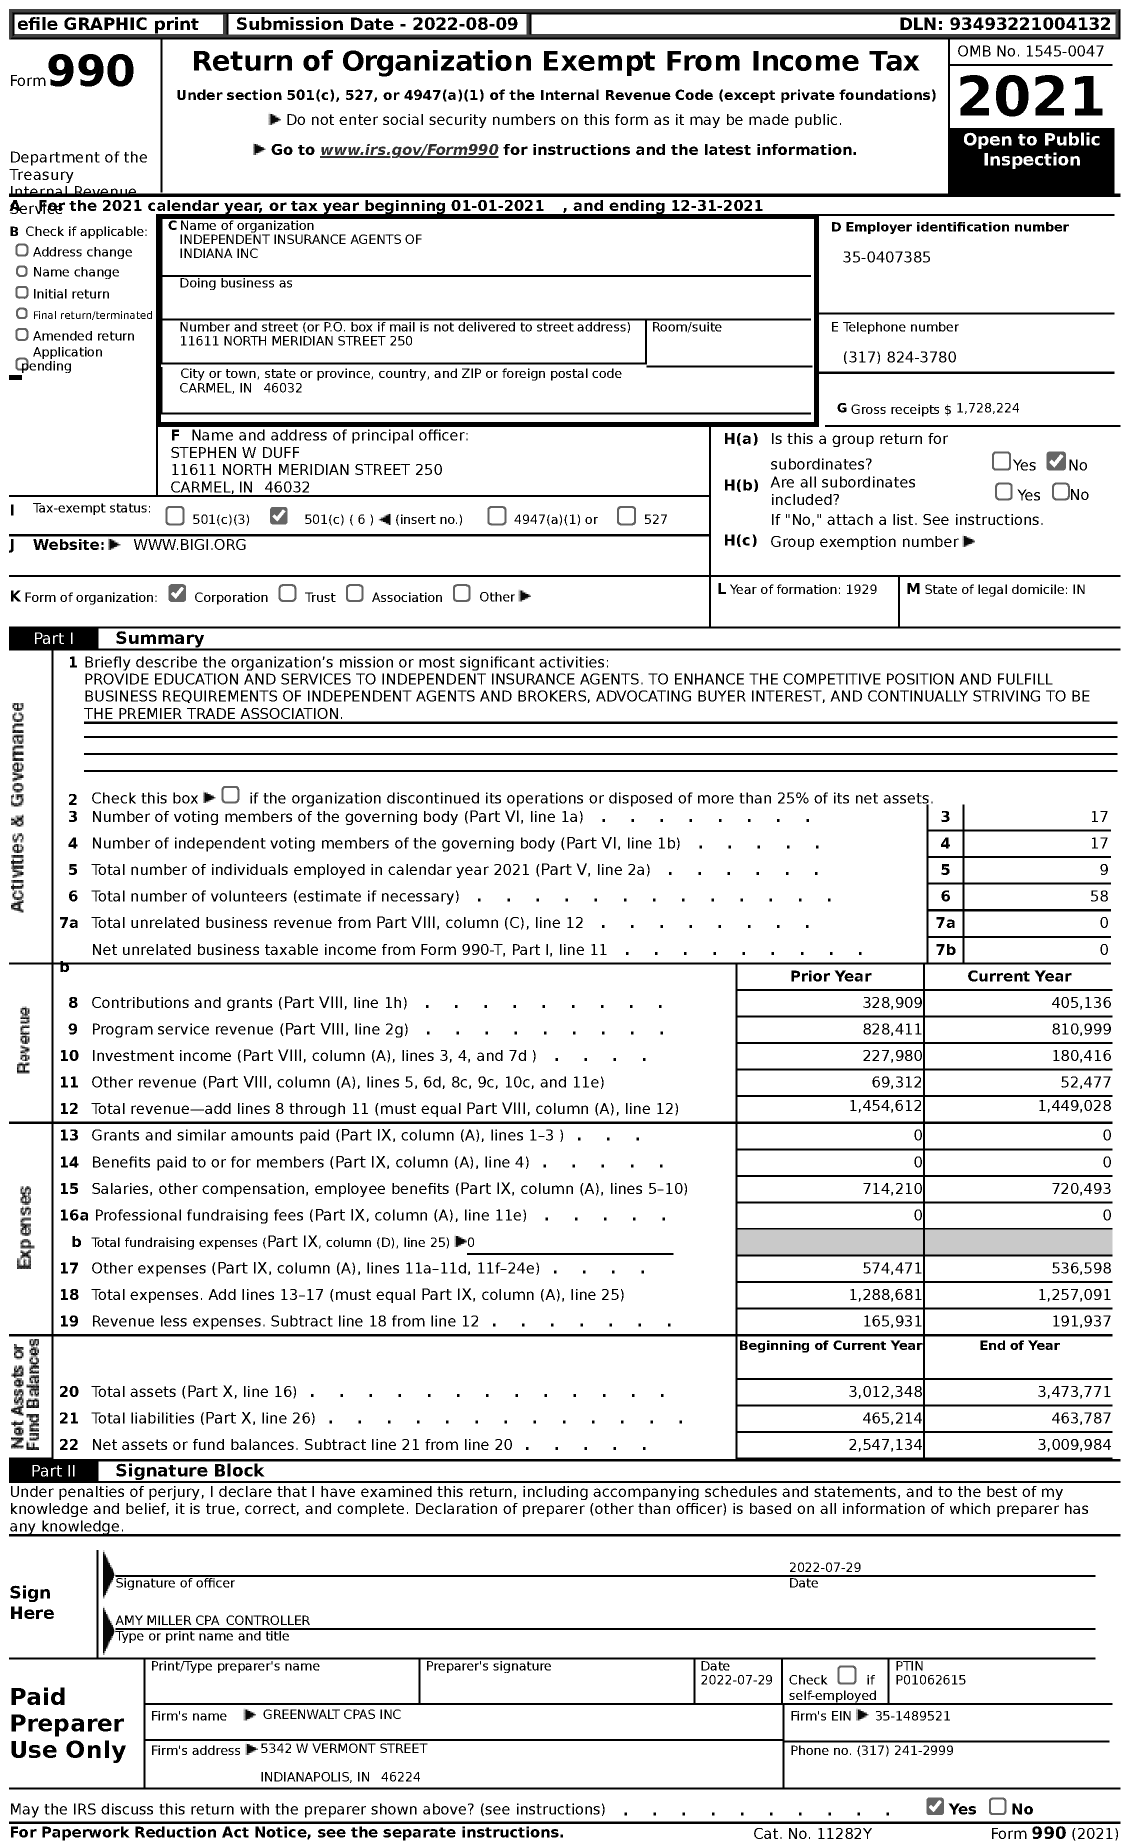 Image of first page of 2021 Form 990 for Independent Insurance Agents of Indiana (IIAI)